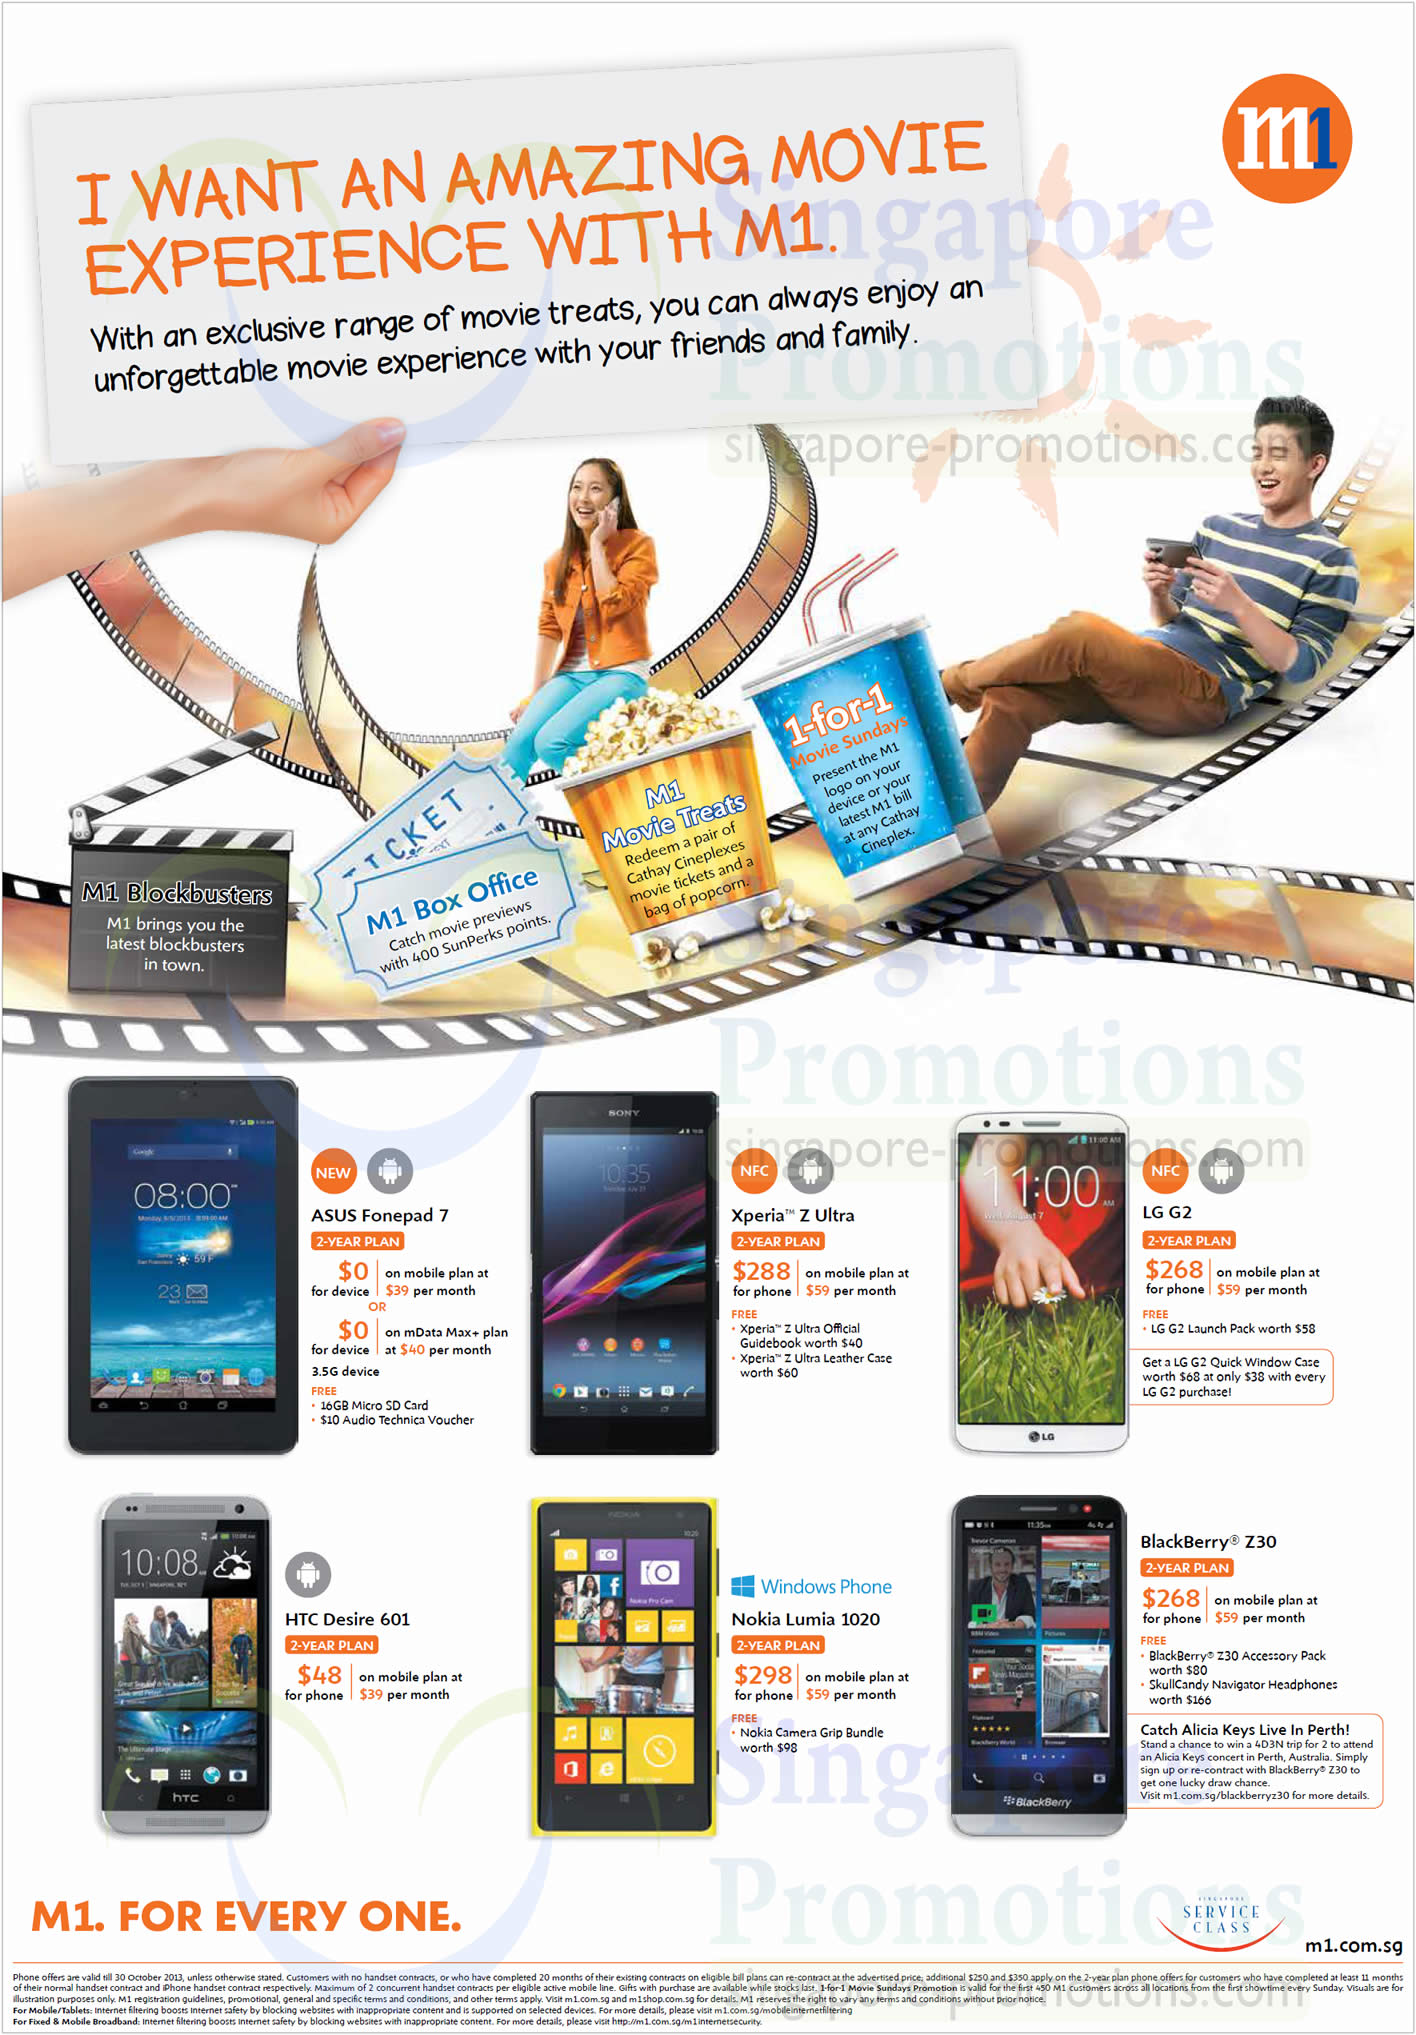 Featured image for M1 Smartphones, Tablets & Home/Mobile Broadband Offers 26 Oct - 1 Nov 2013